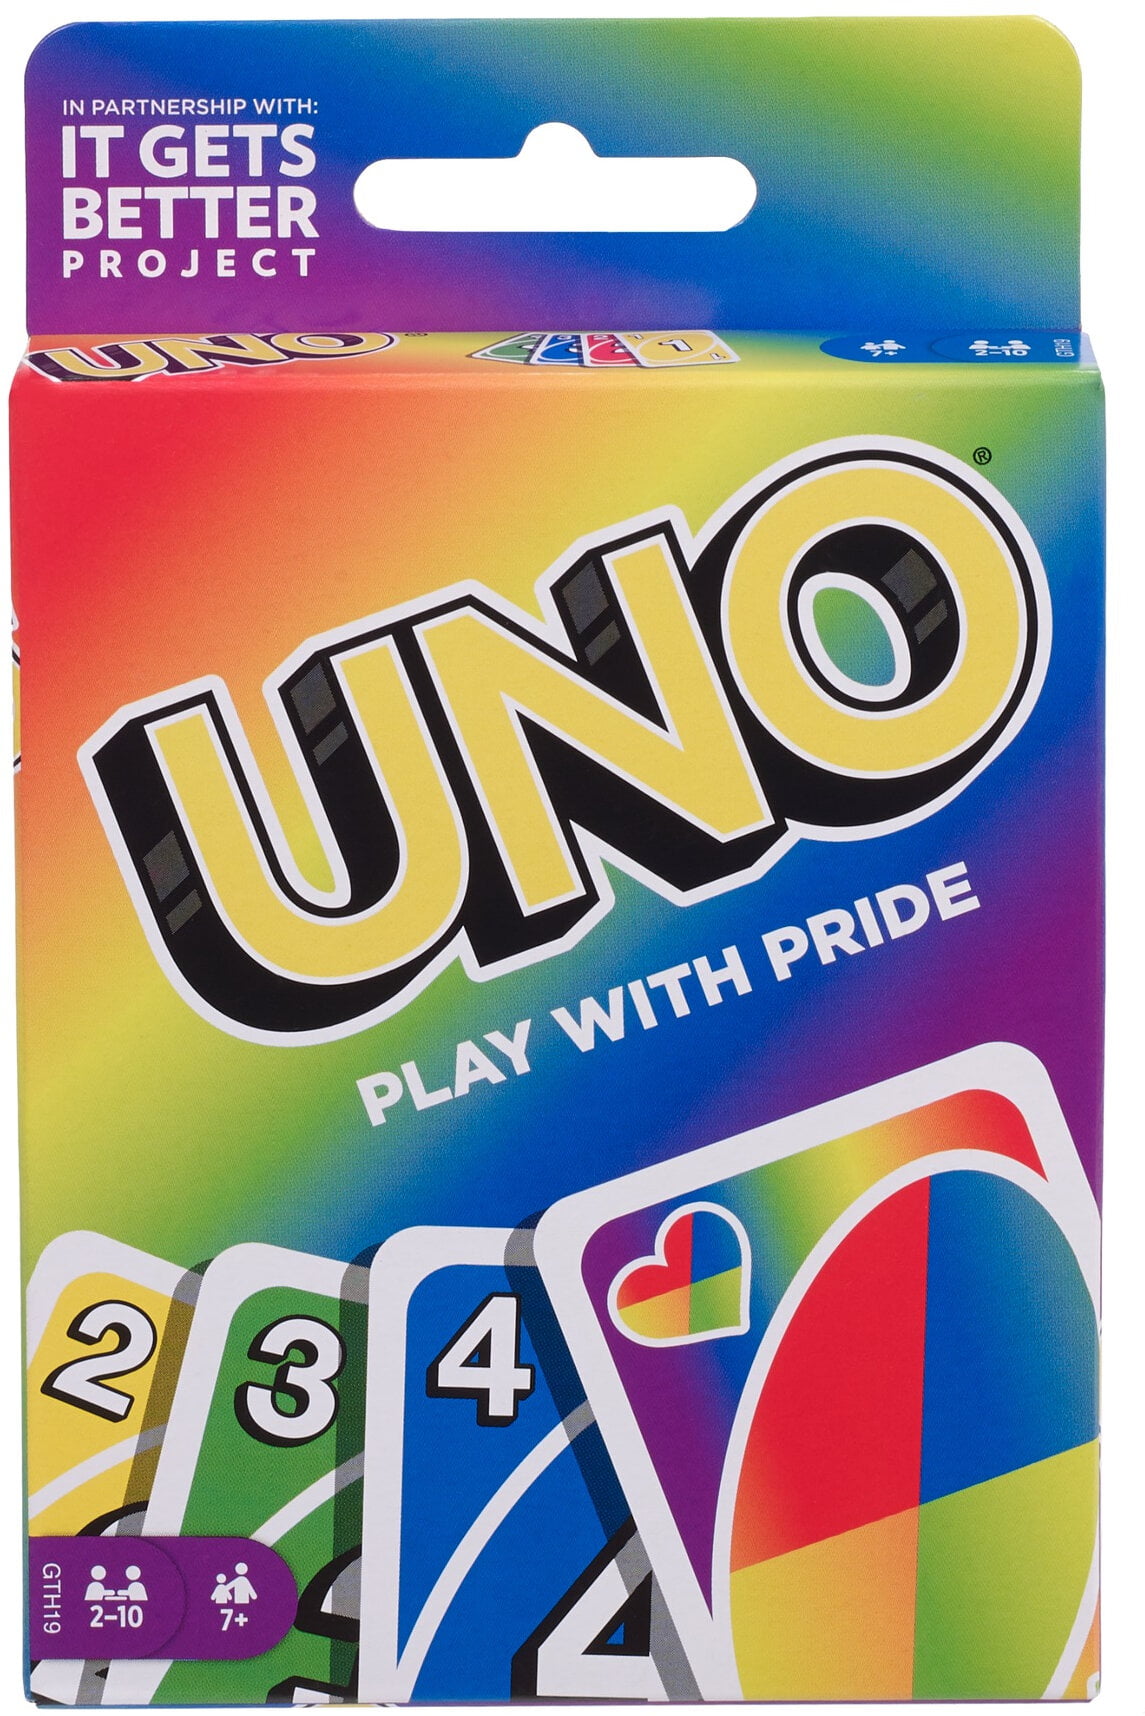 Age 7 Years + 112 Cards/Instructions 2-10 Players Mattel Uno Trolls Card Game 